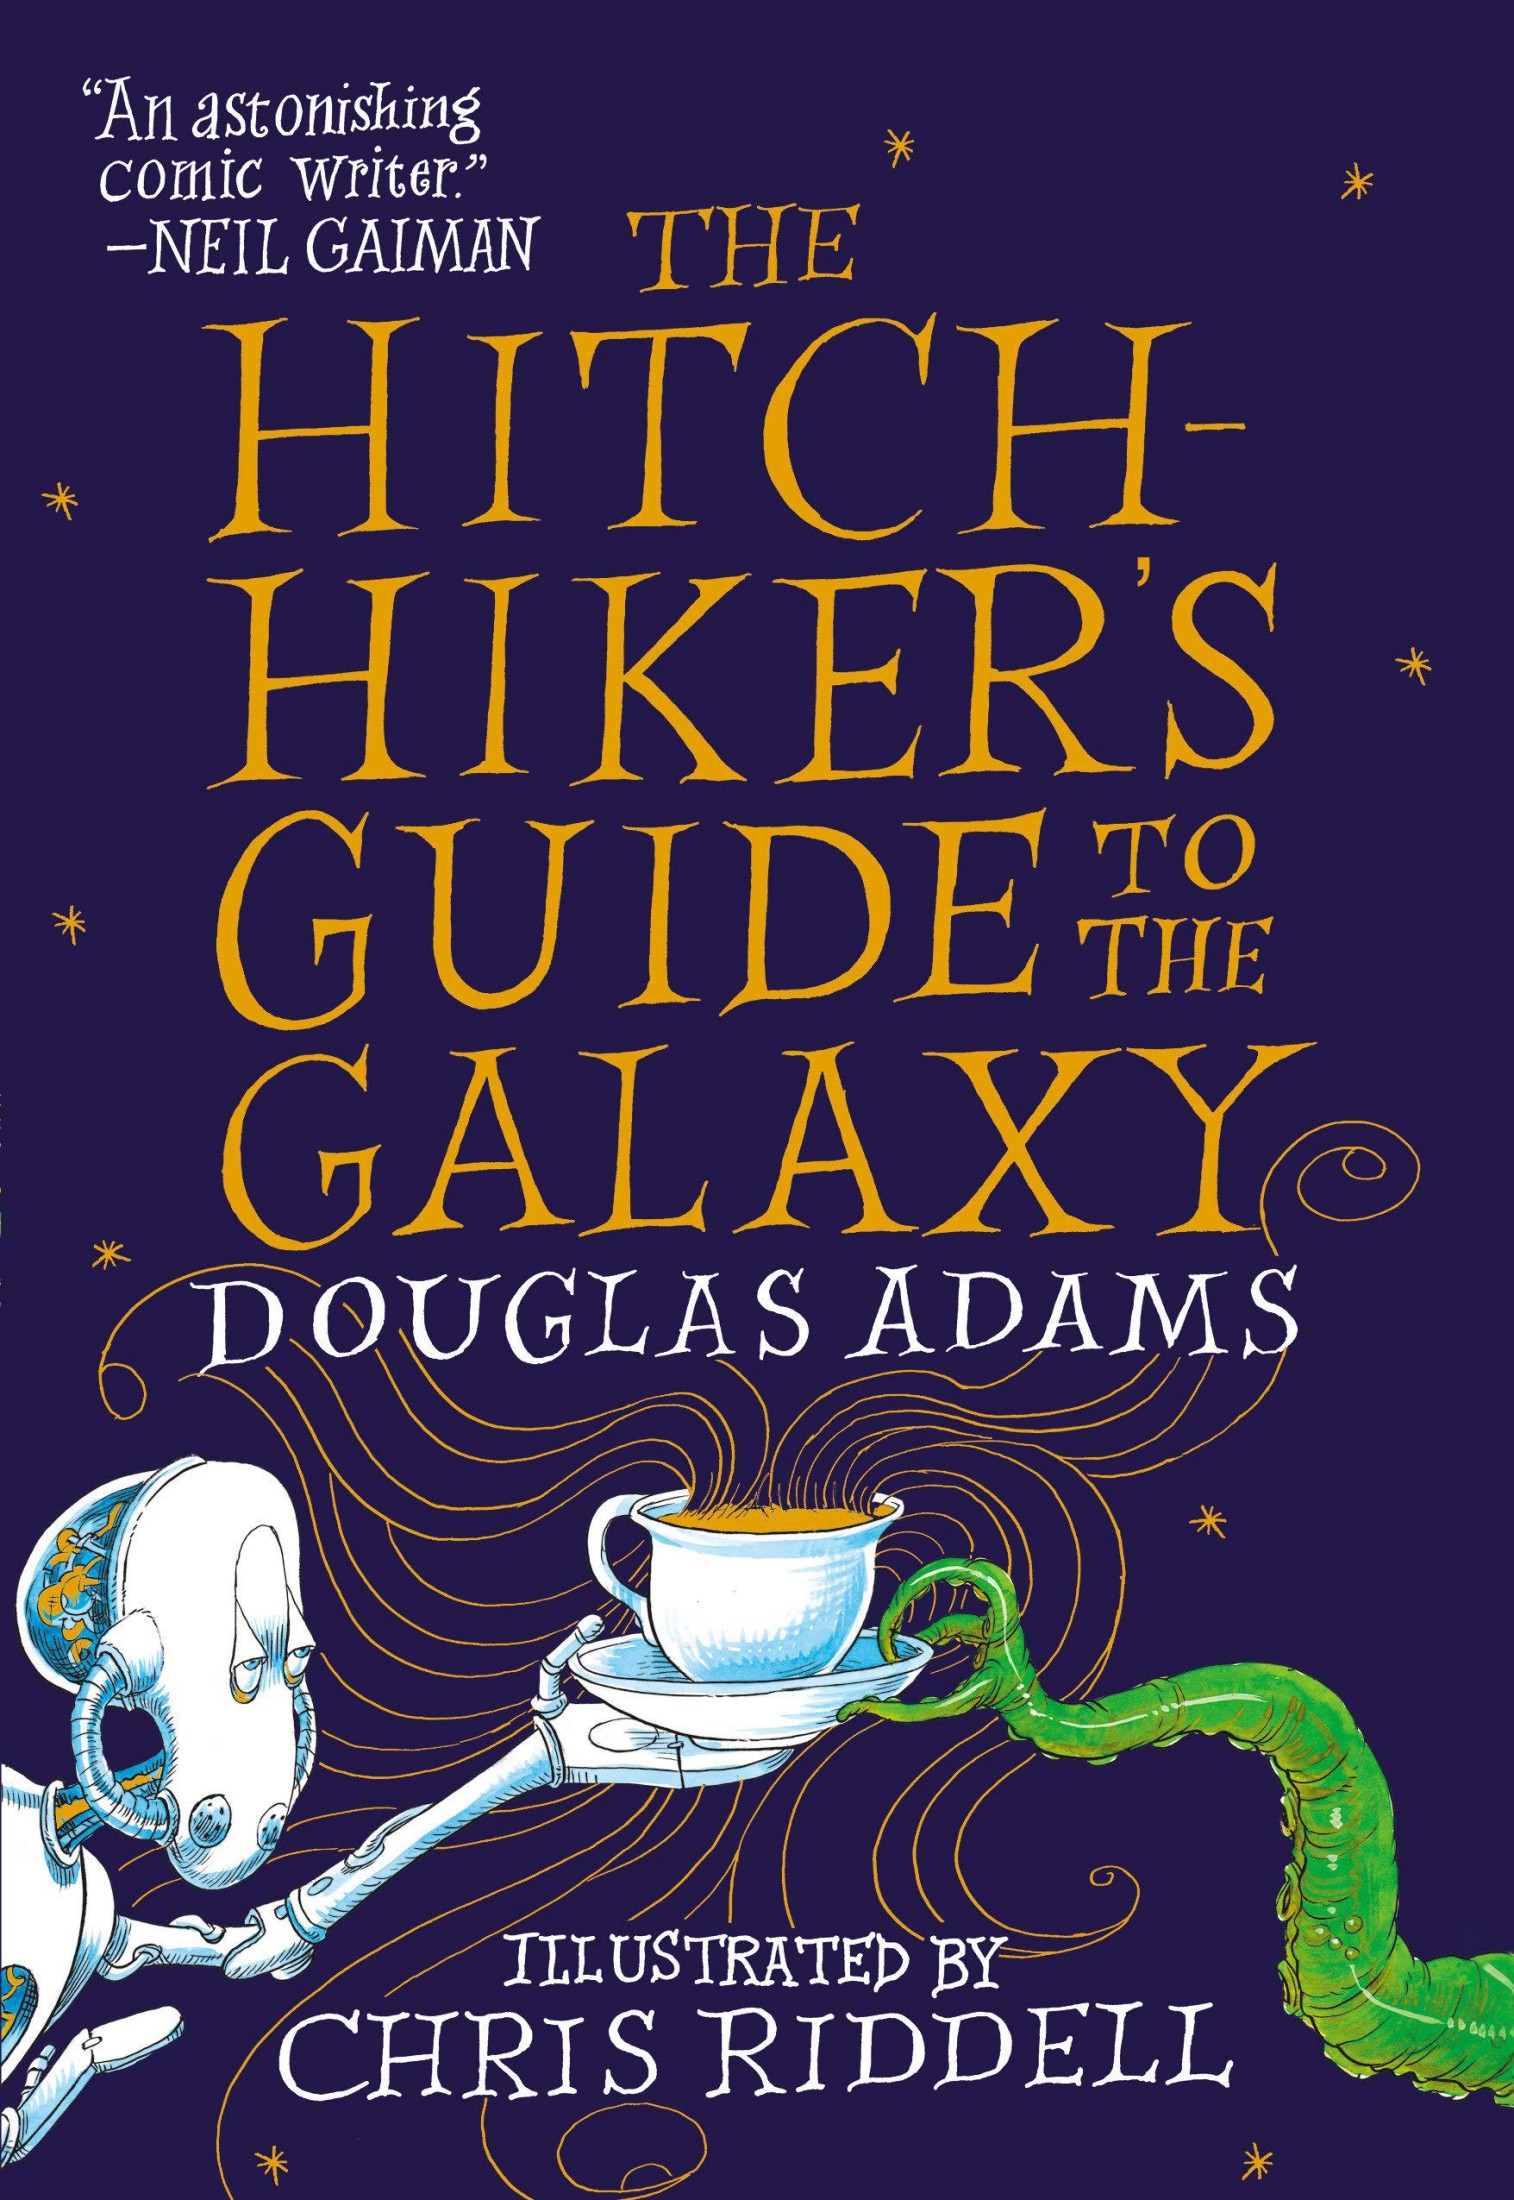 Douglas Adams: The Hitchhiker's Guide to the Galaxy (2007, Random House Publishing Group)